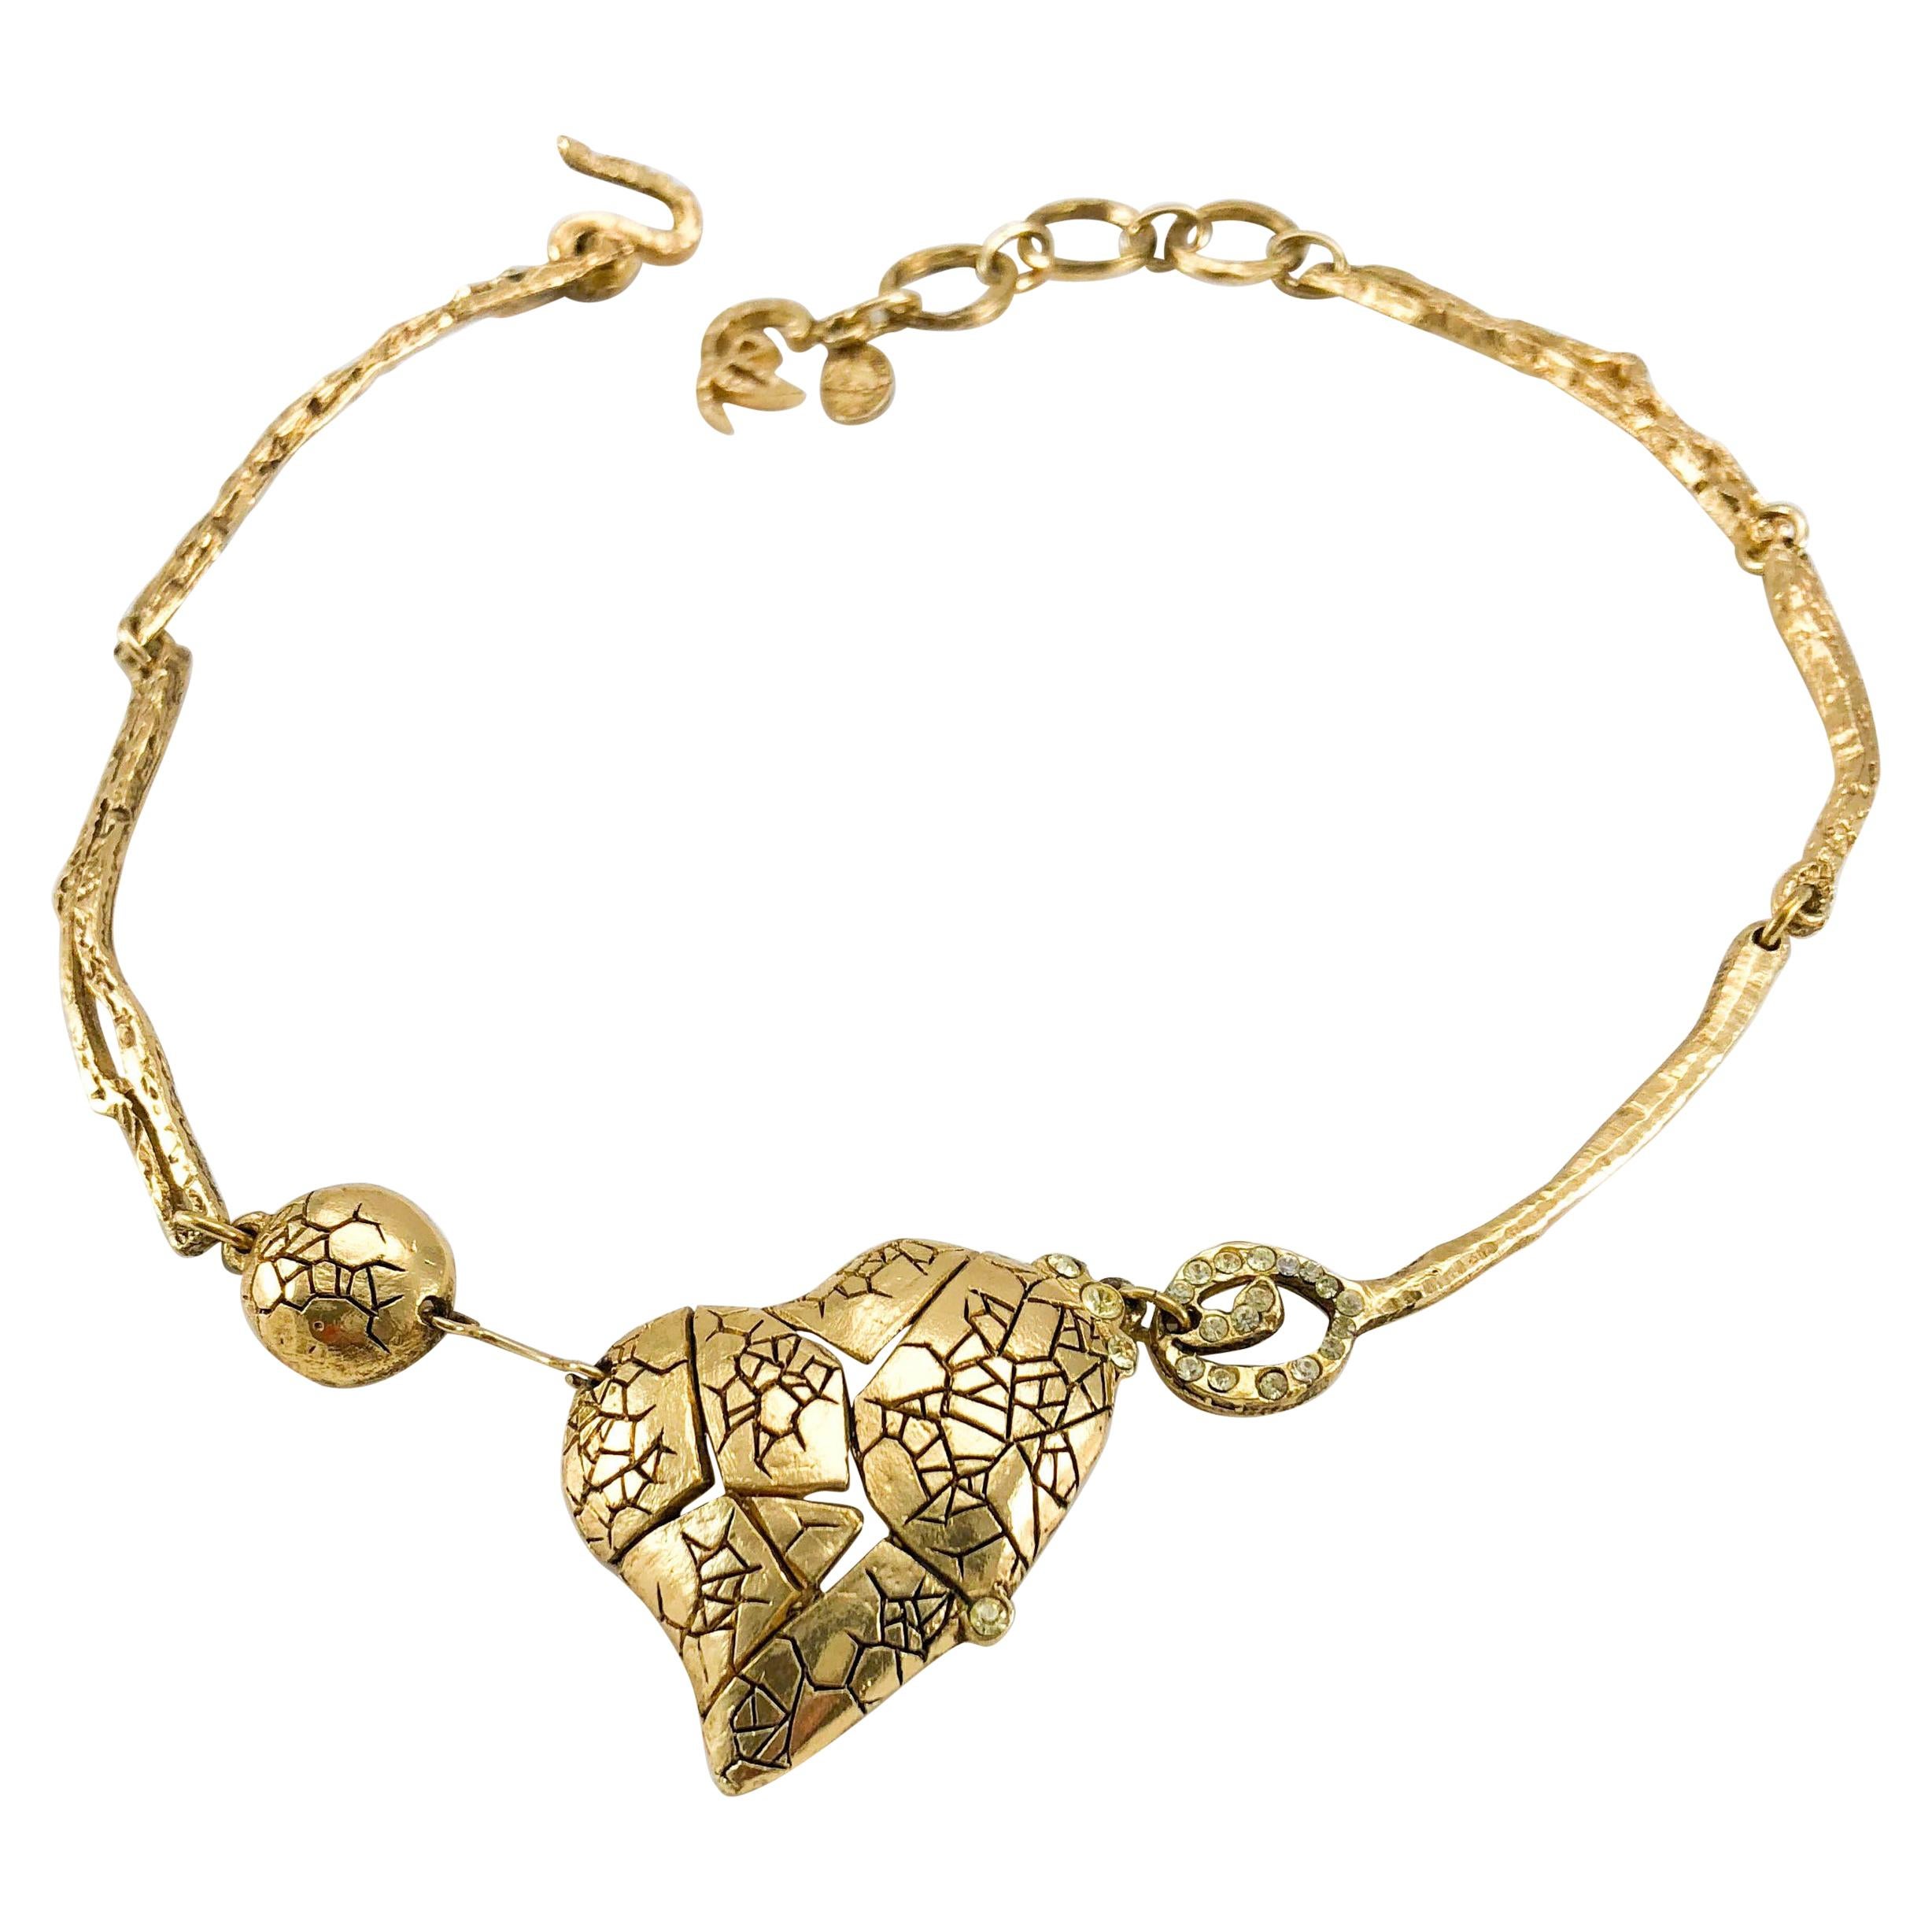 1990's Christian Lacroix Gold-Plated 'Broken Heart' Necklace